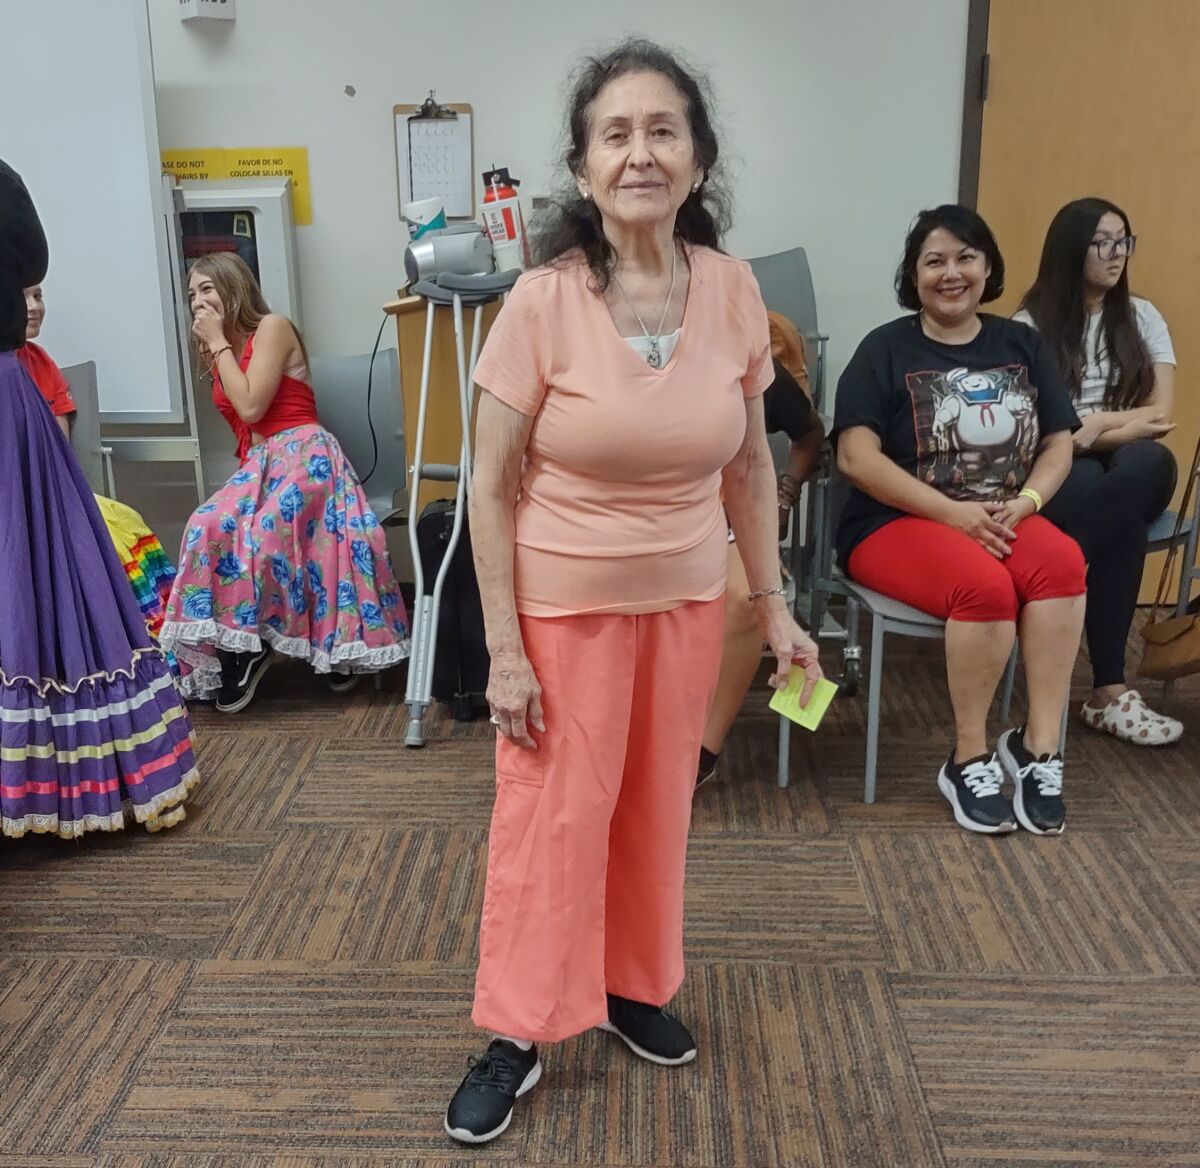 Aida Perez teaches free Ballet Folklorico lessons and sews skirts for some of her students.